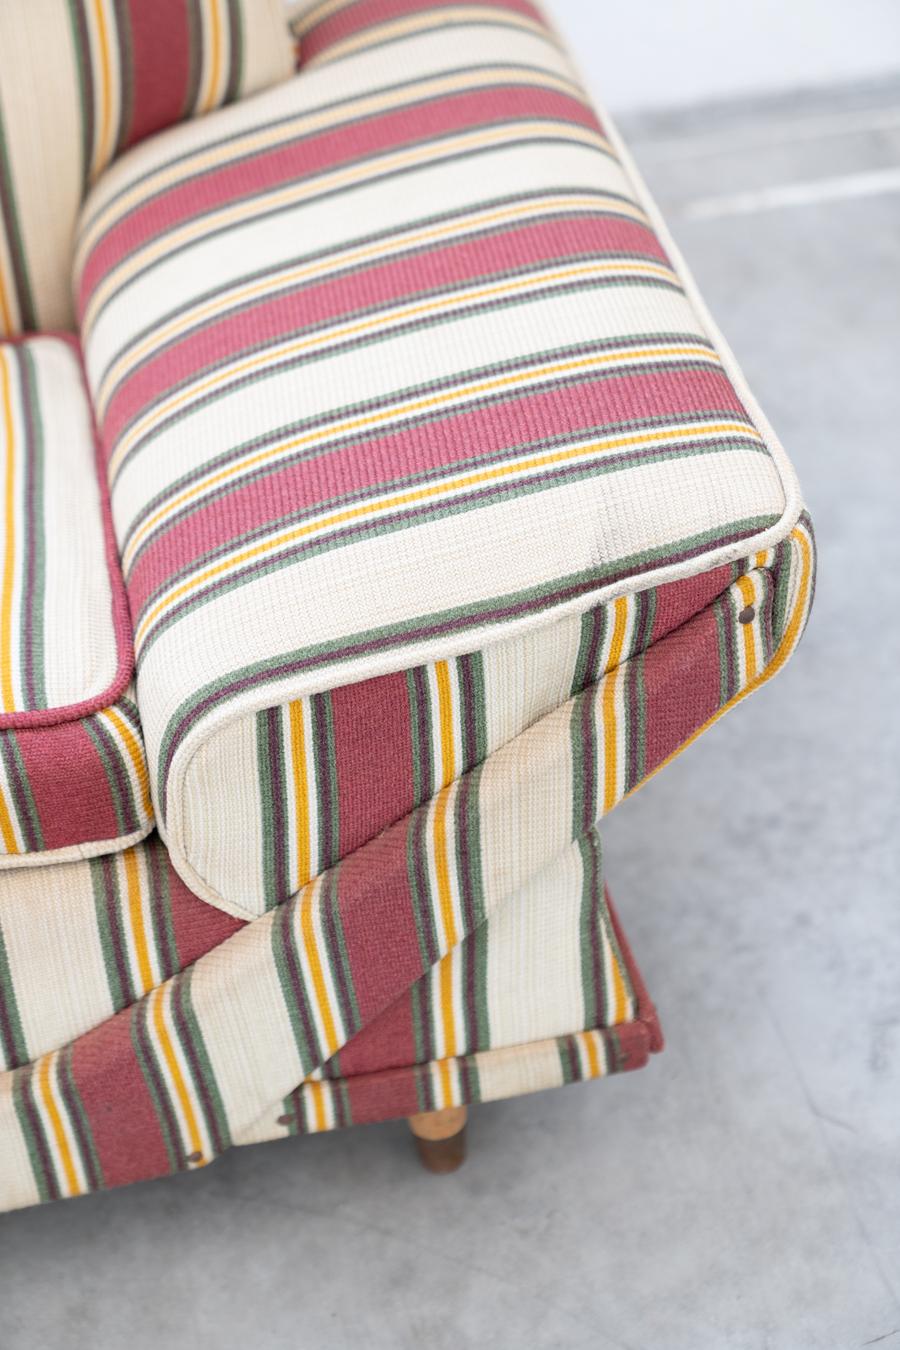 Central American American sofa and armchair in original striped fabric1970s For Sale